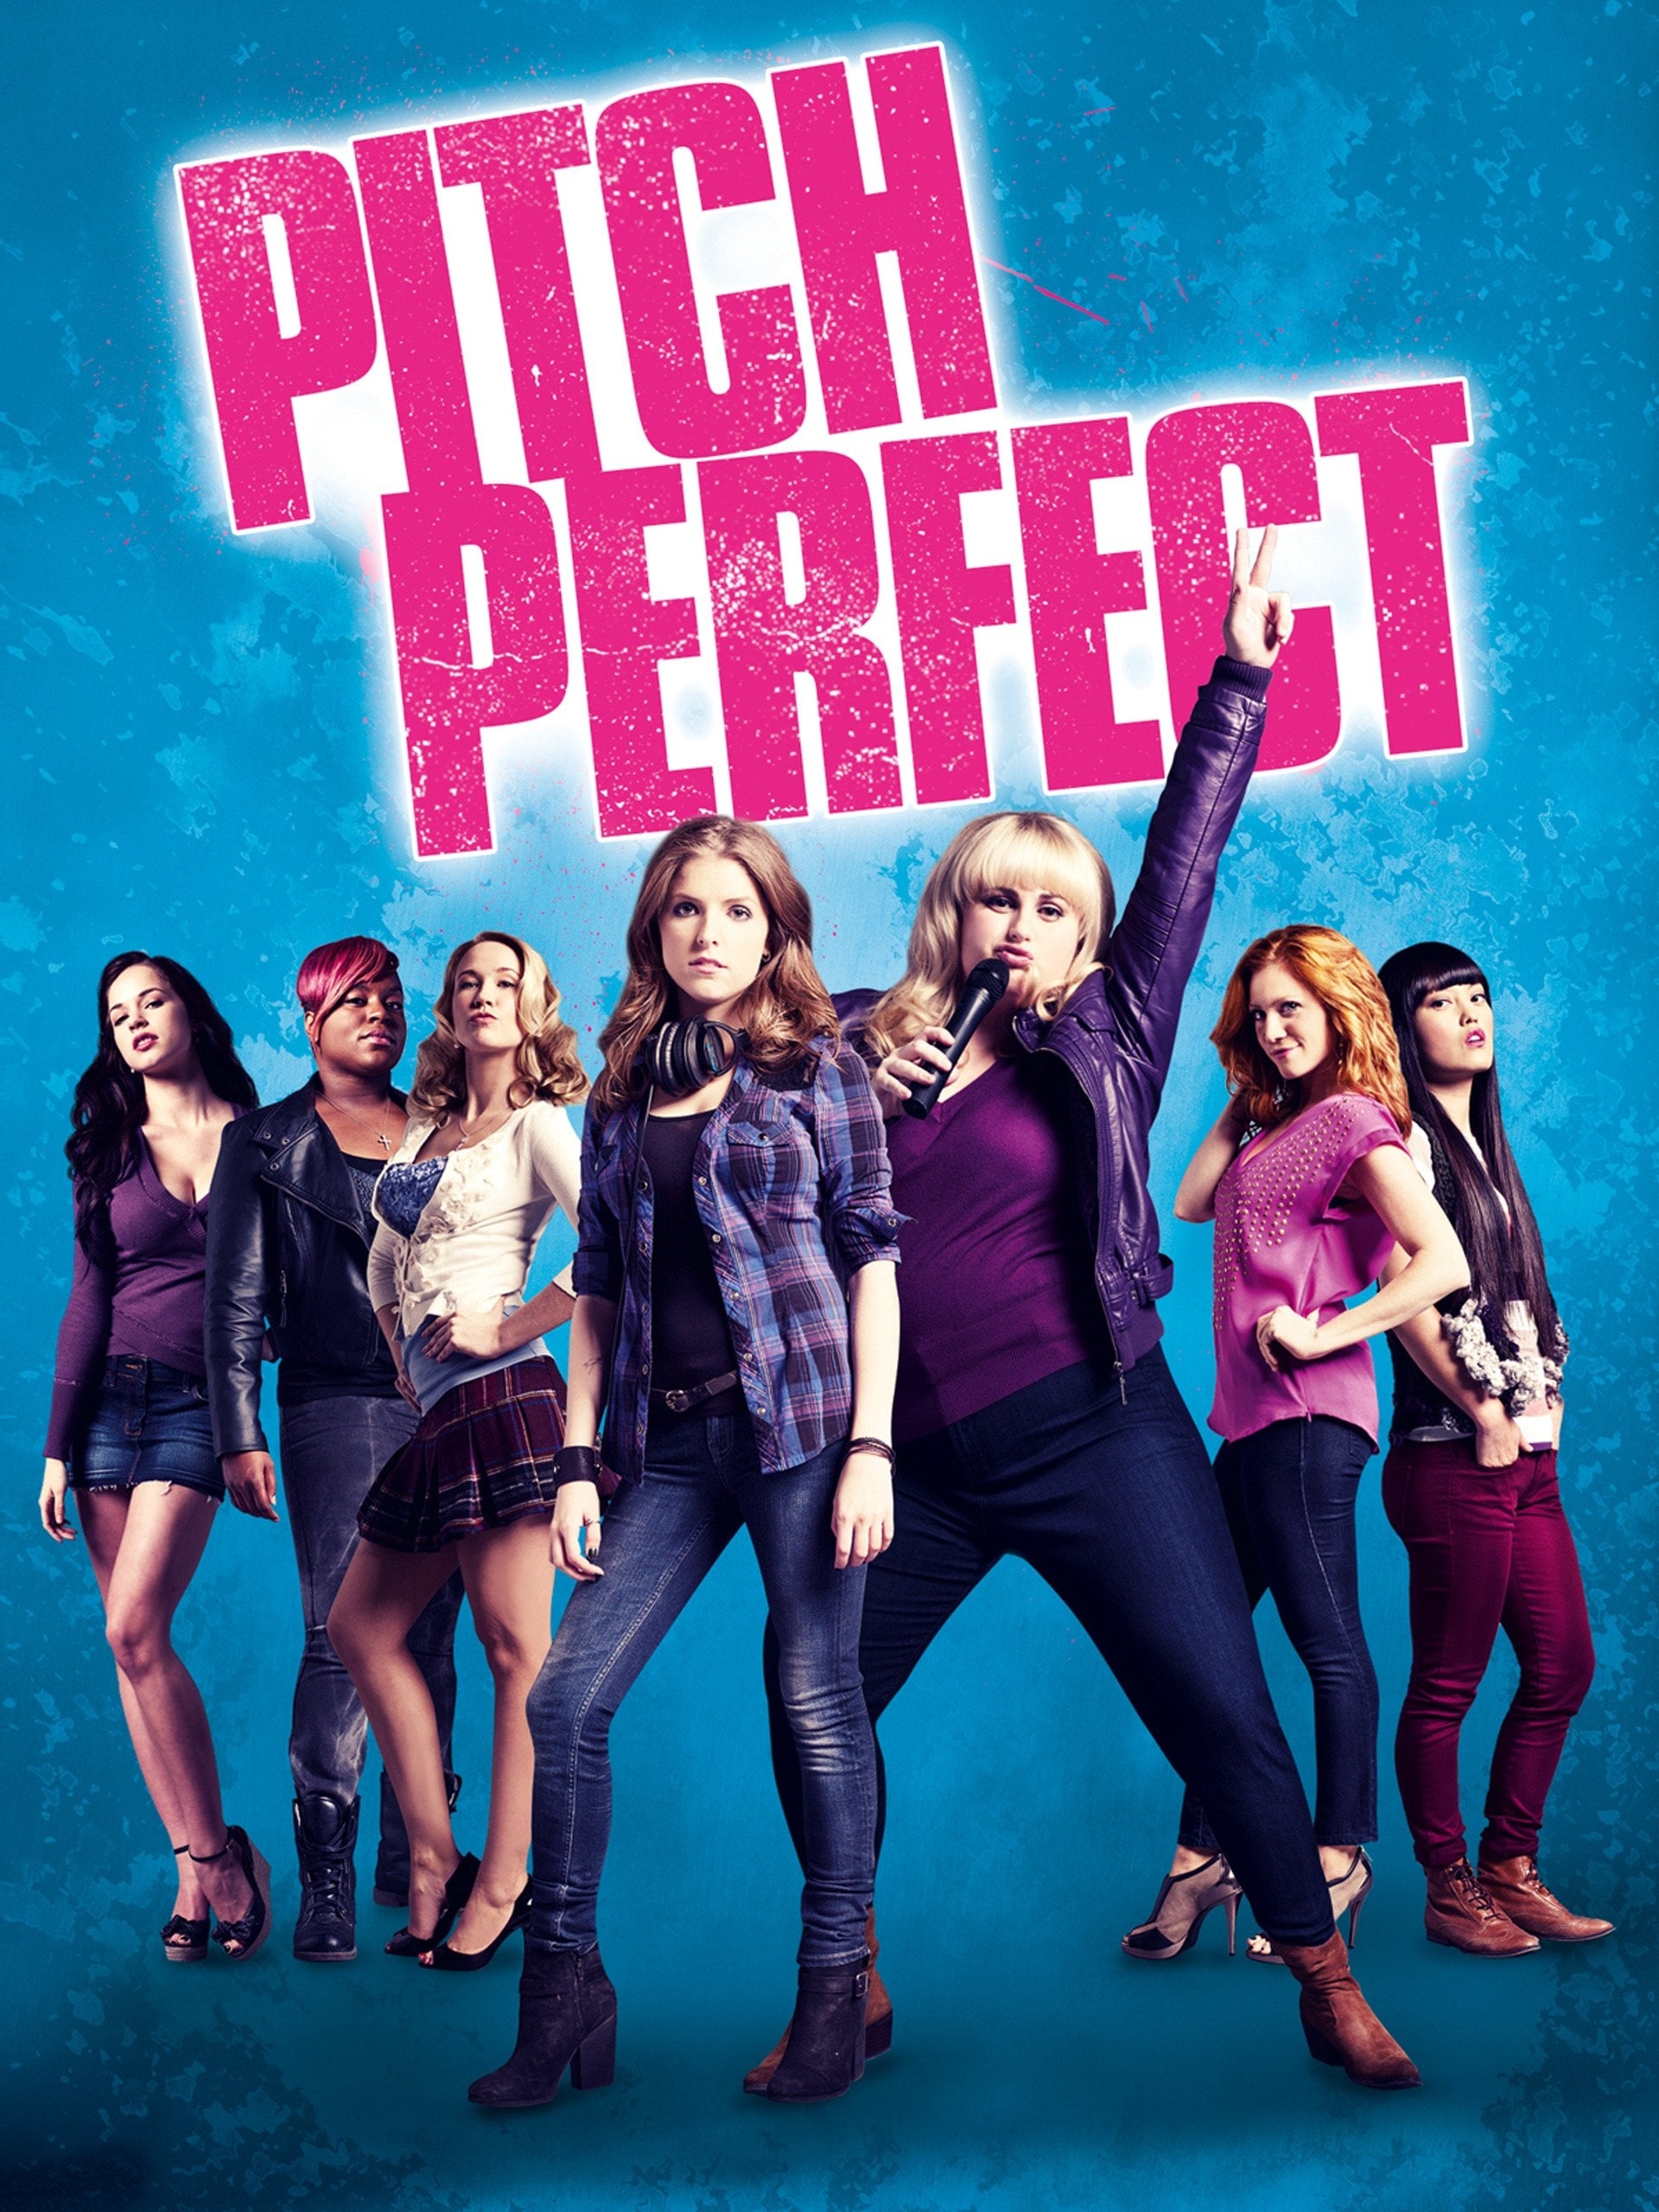 Pitch Perfect 2012 Posters The Movie Database Tmdb